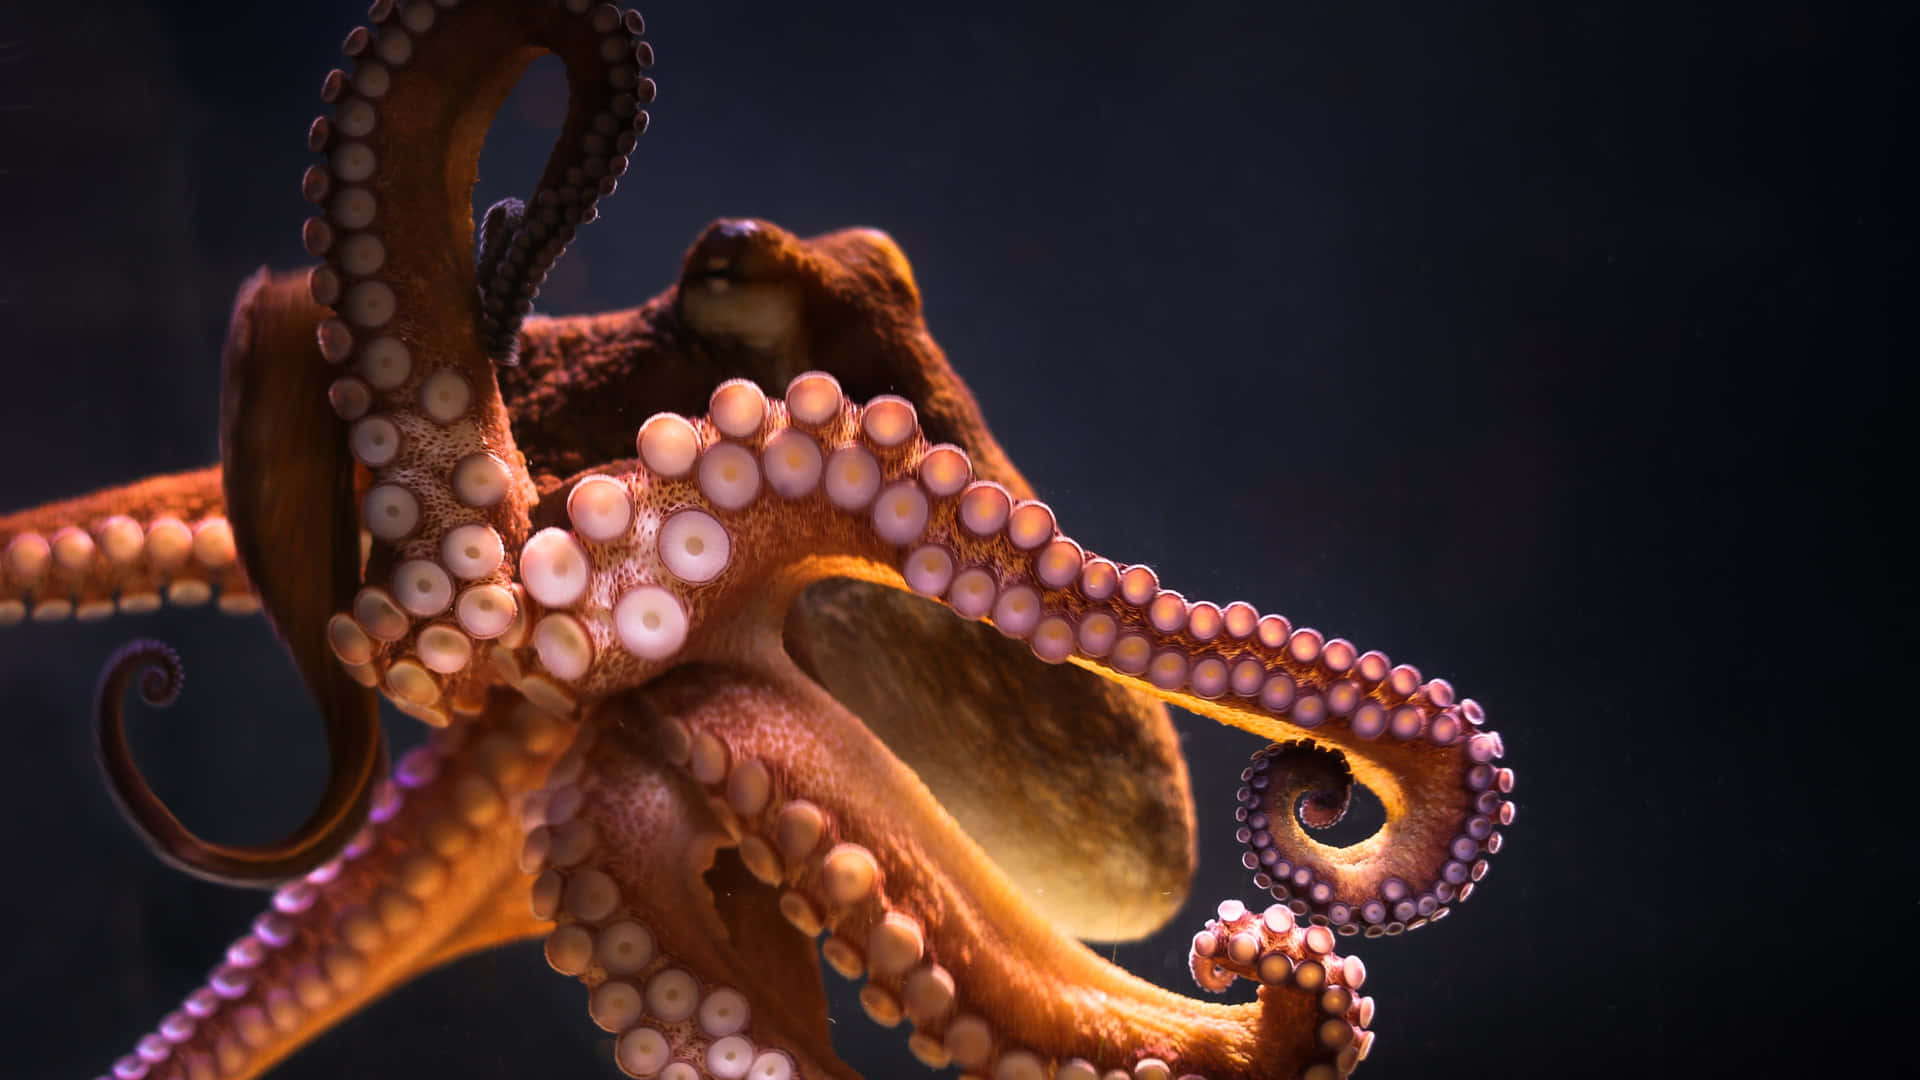 Mysterious Octopus